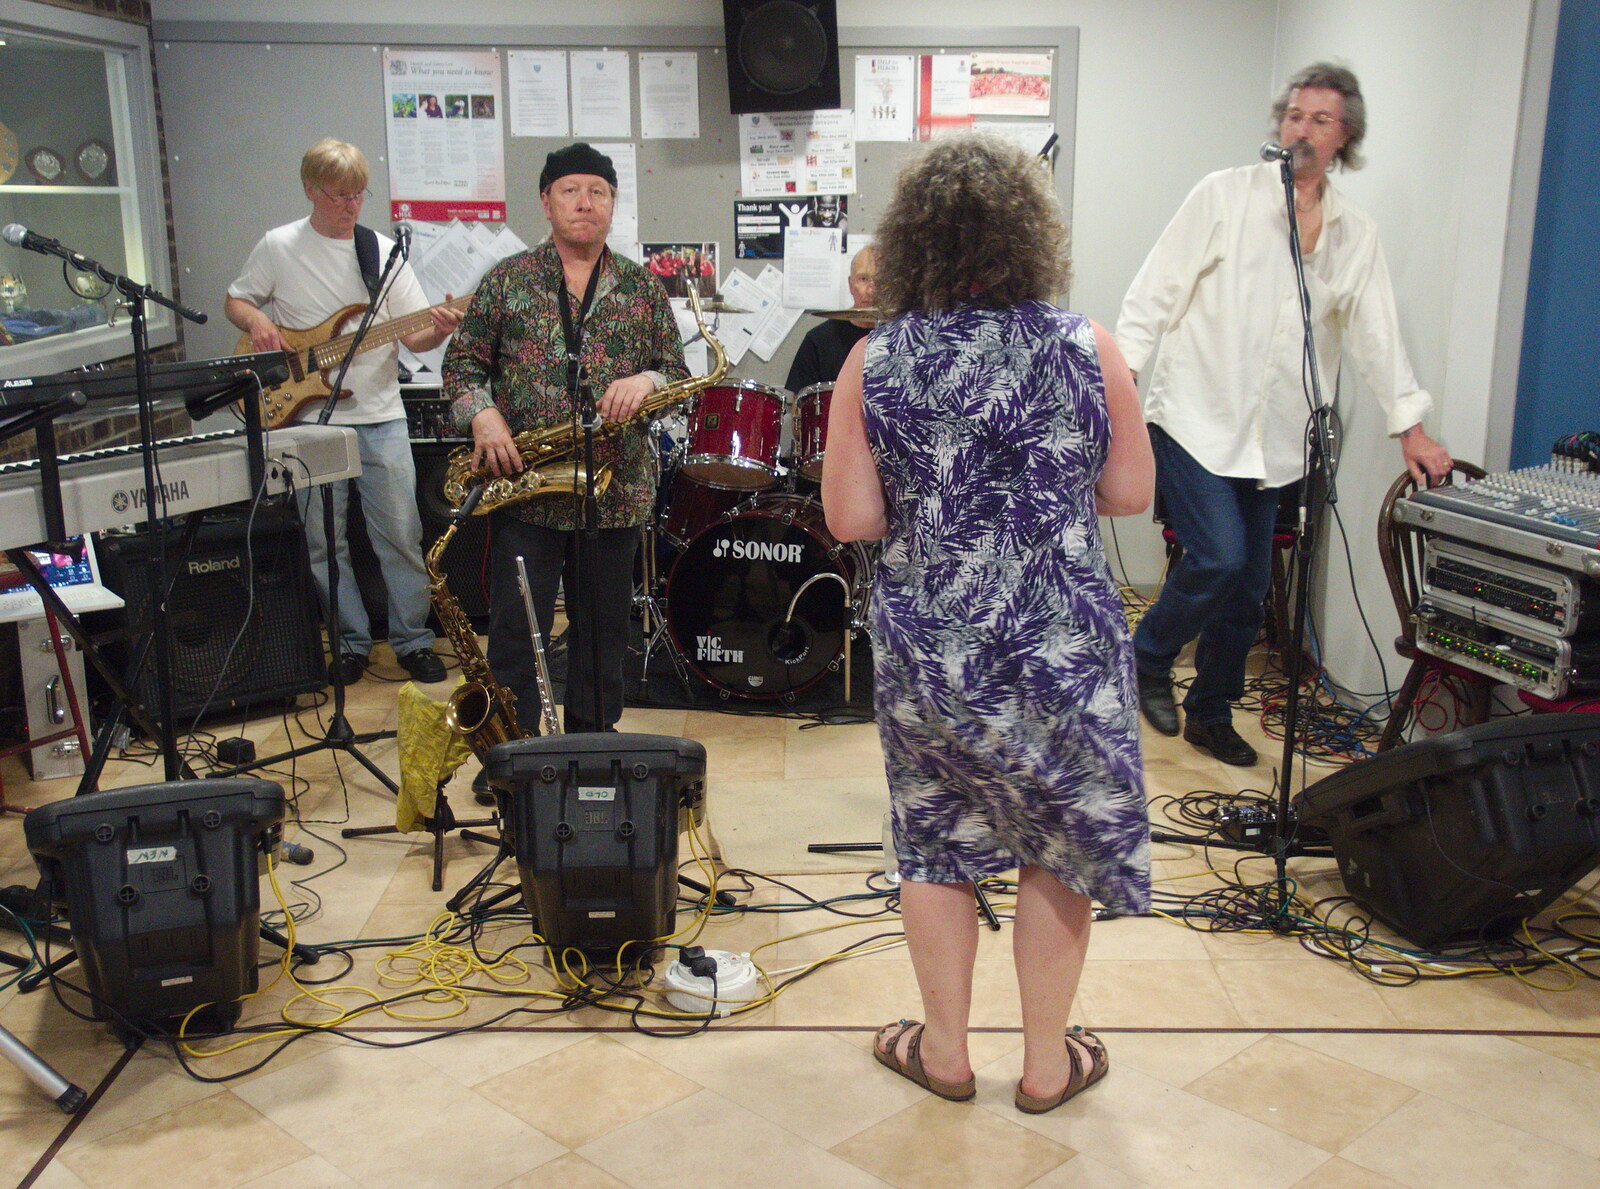 The BBs, with John and Mikey depping, set up from The BBs at Diss Rugby Club, Bellrope Lane, Roydon, Norfolk - 7th June 2014